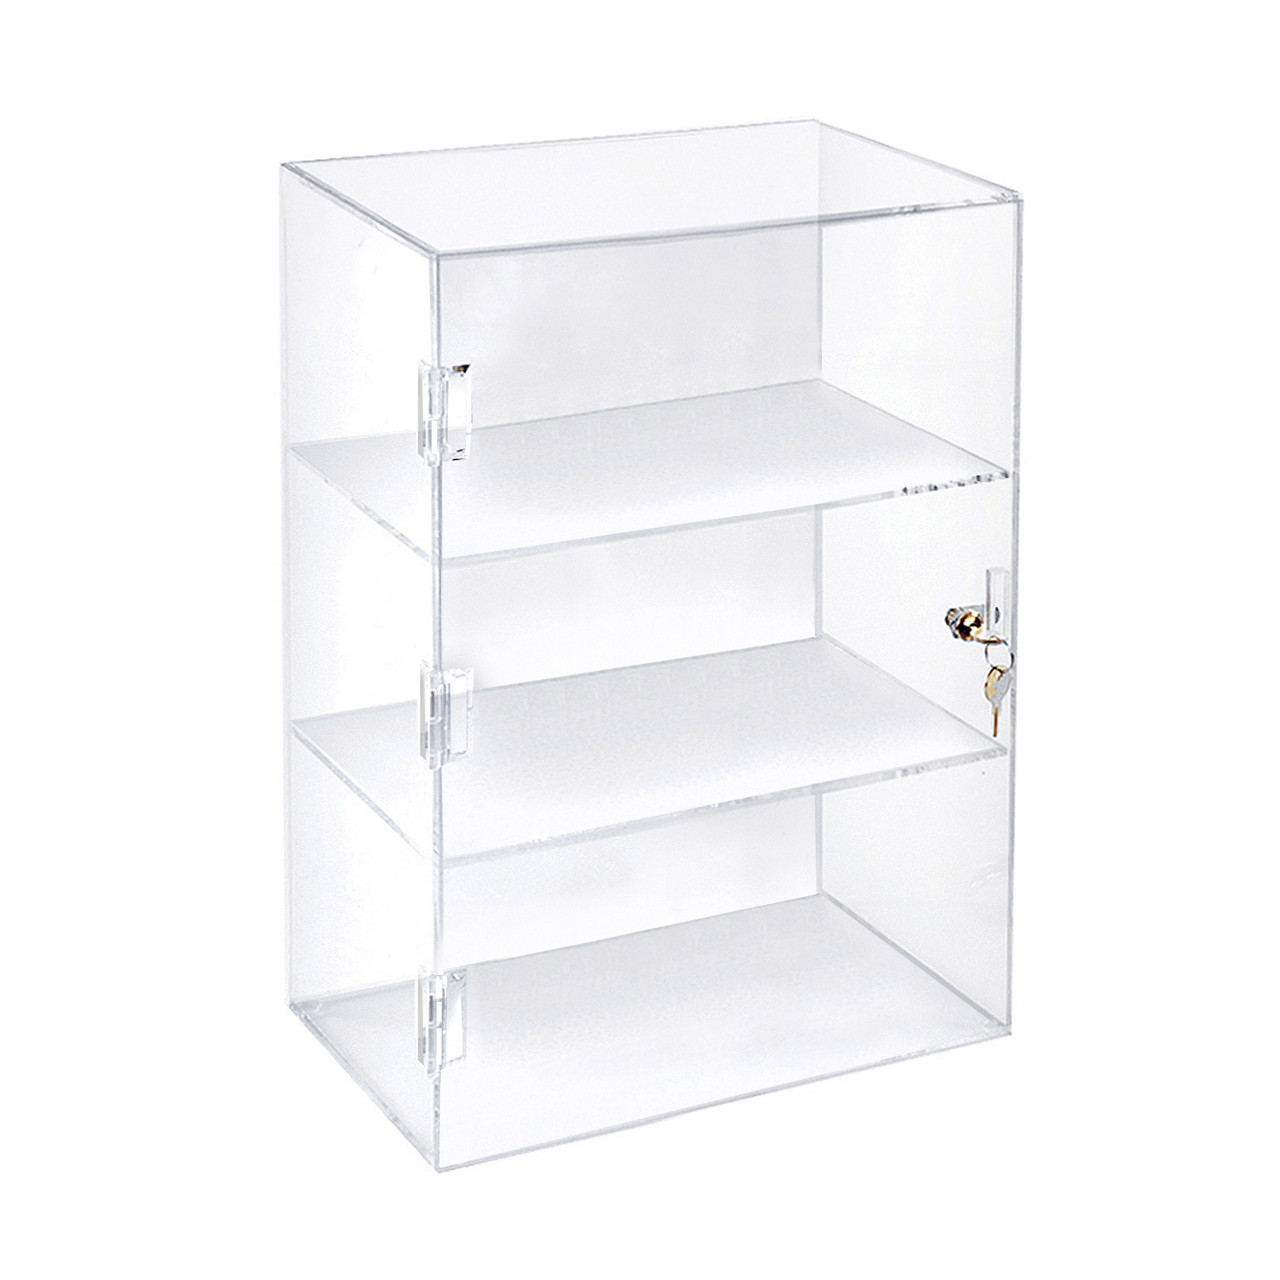 DS-Acrylic Countertop Display Case 16 x 8 x 19 Showcase Cabinet